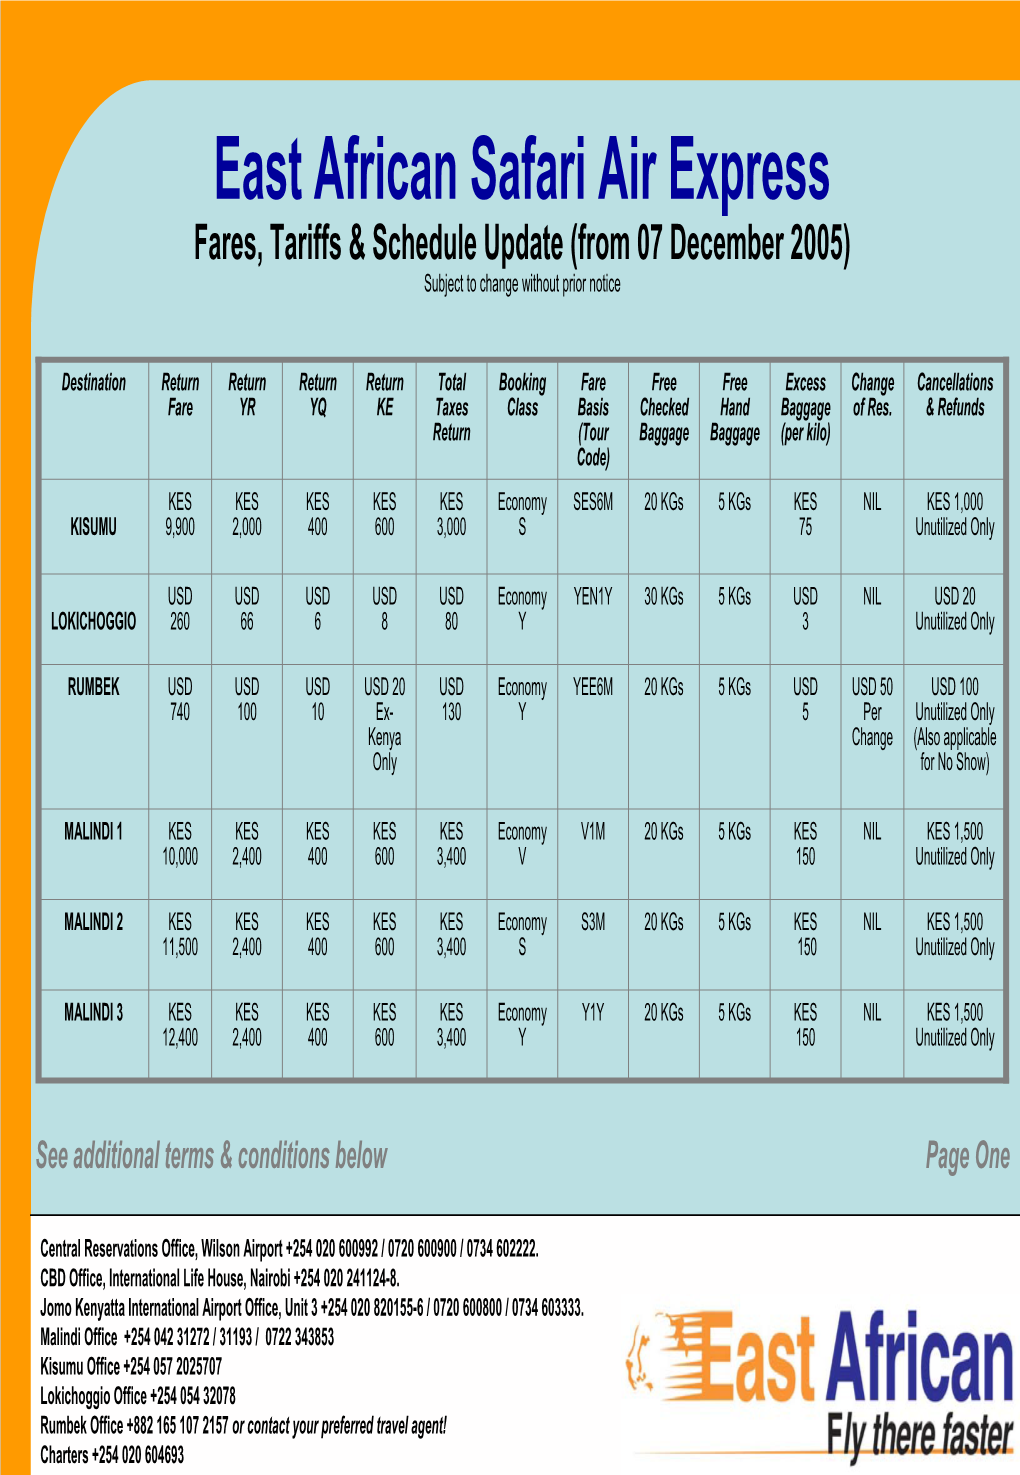 East African Safari Air Express Fares, Tariffs & Schedule Update (From 07 December 2005) Subject to Change Without Prior Notice